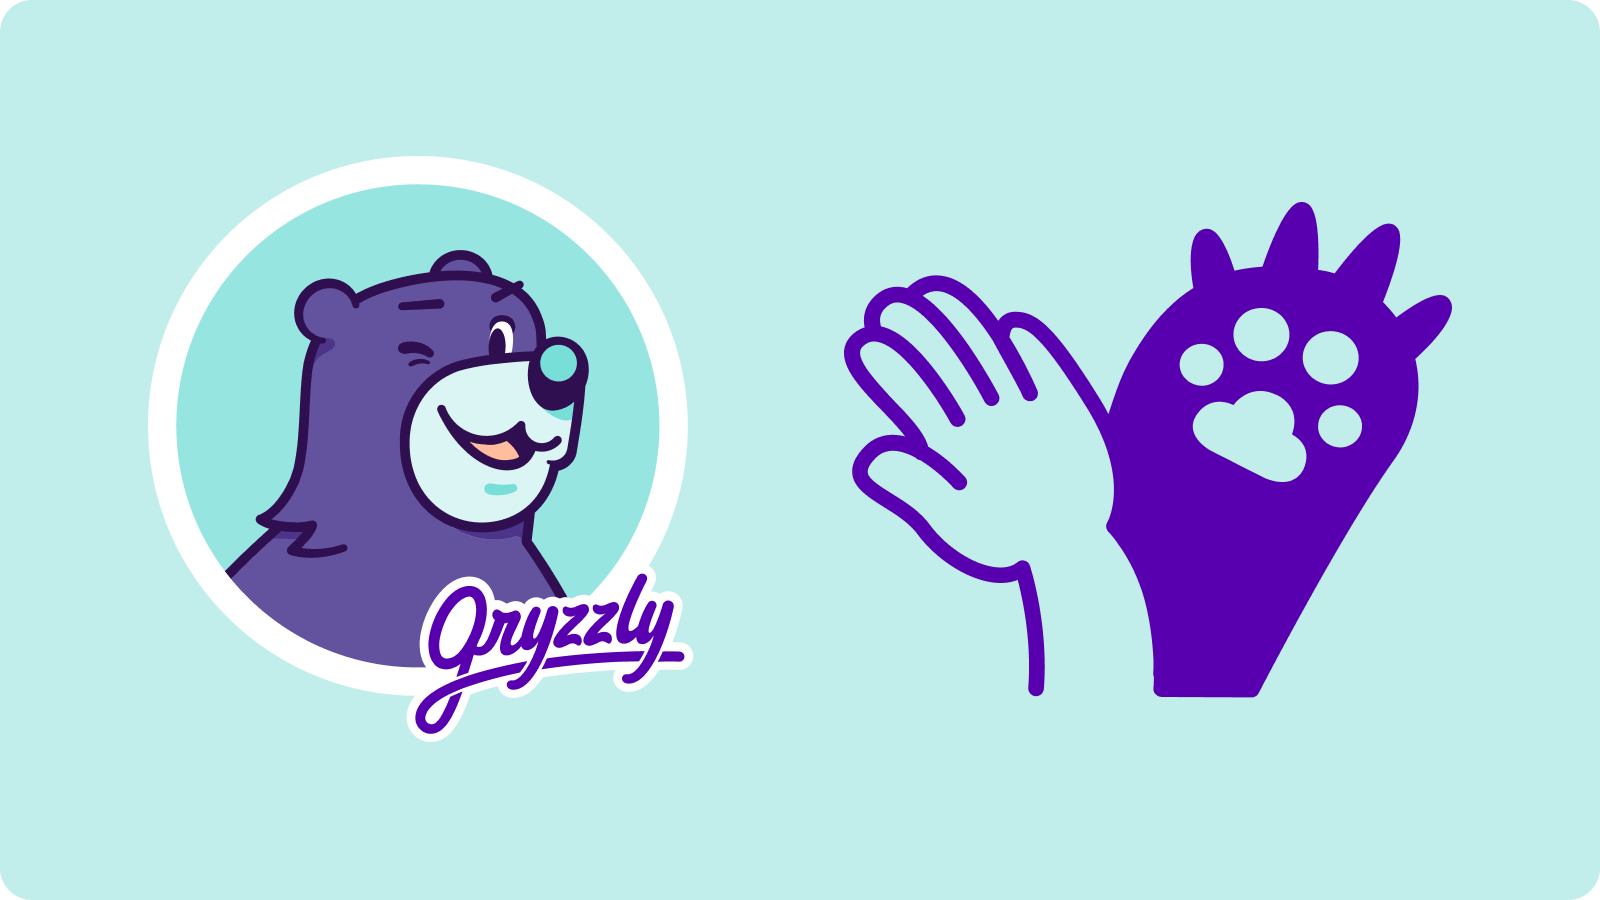 Gryzzly's mascot next to the drawing of a hand a bear paw doing an high five.